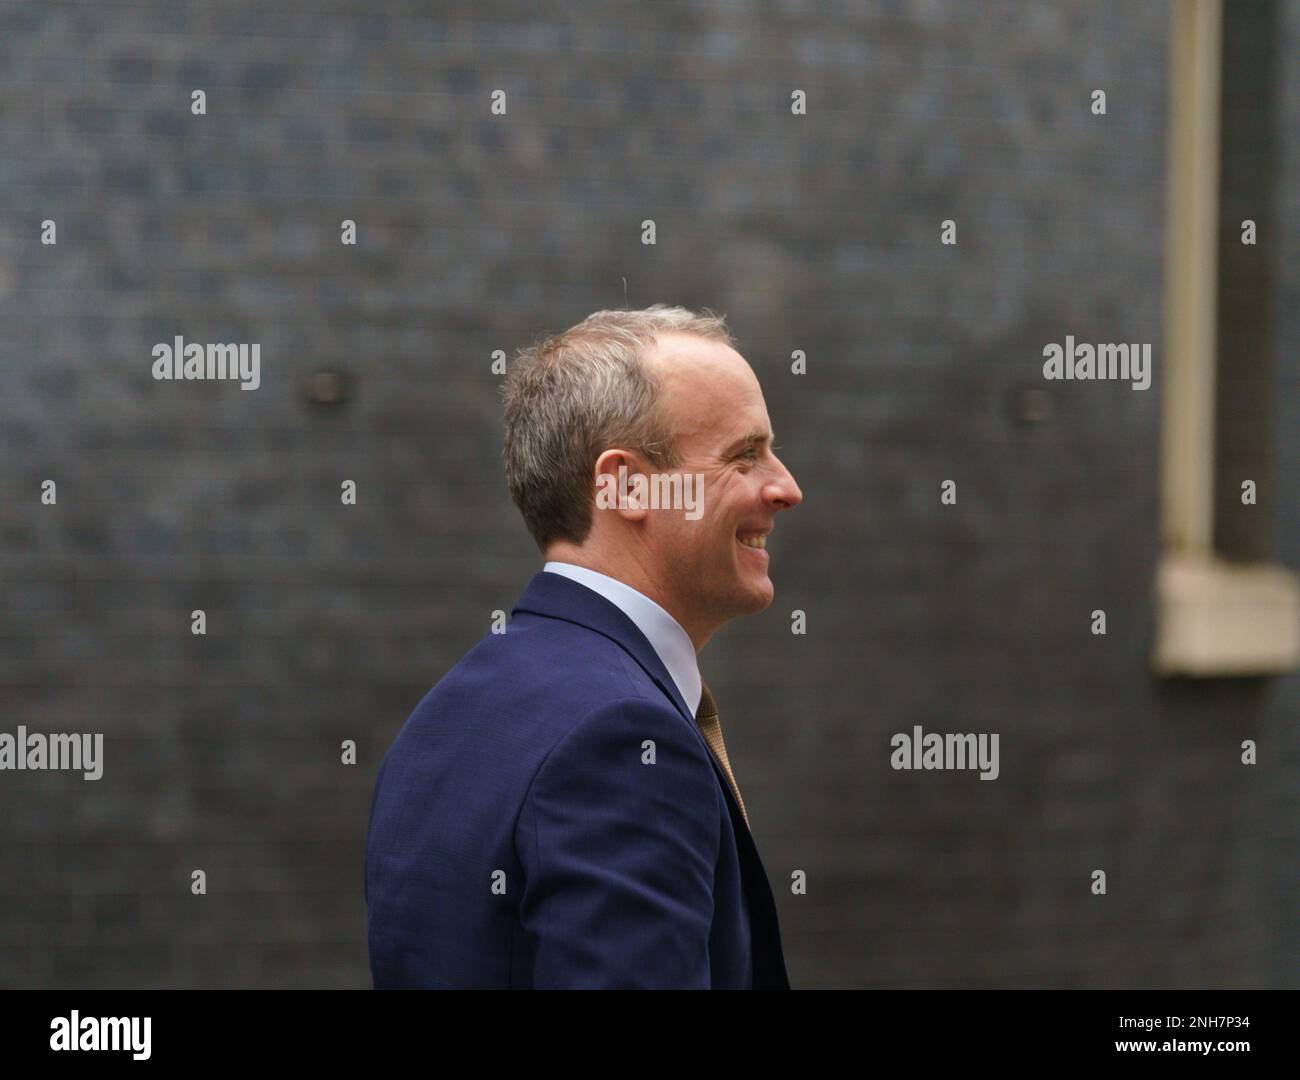 Downing Street, London, UK. February 21st 2023. Minsters leave the weekly Cabinet Meeting at Downing Street. PICTURED: Rt Hon Dominic Raab Deputy Prime Minister BridgetCatterall/AlamyLiveNews Stock Photo